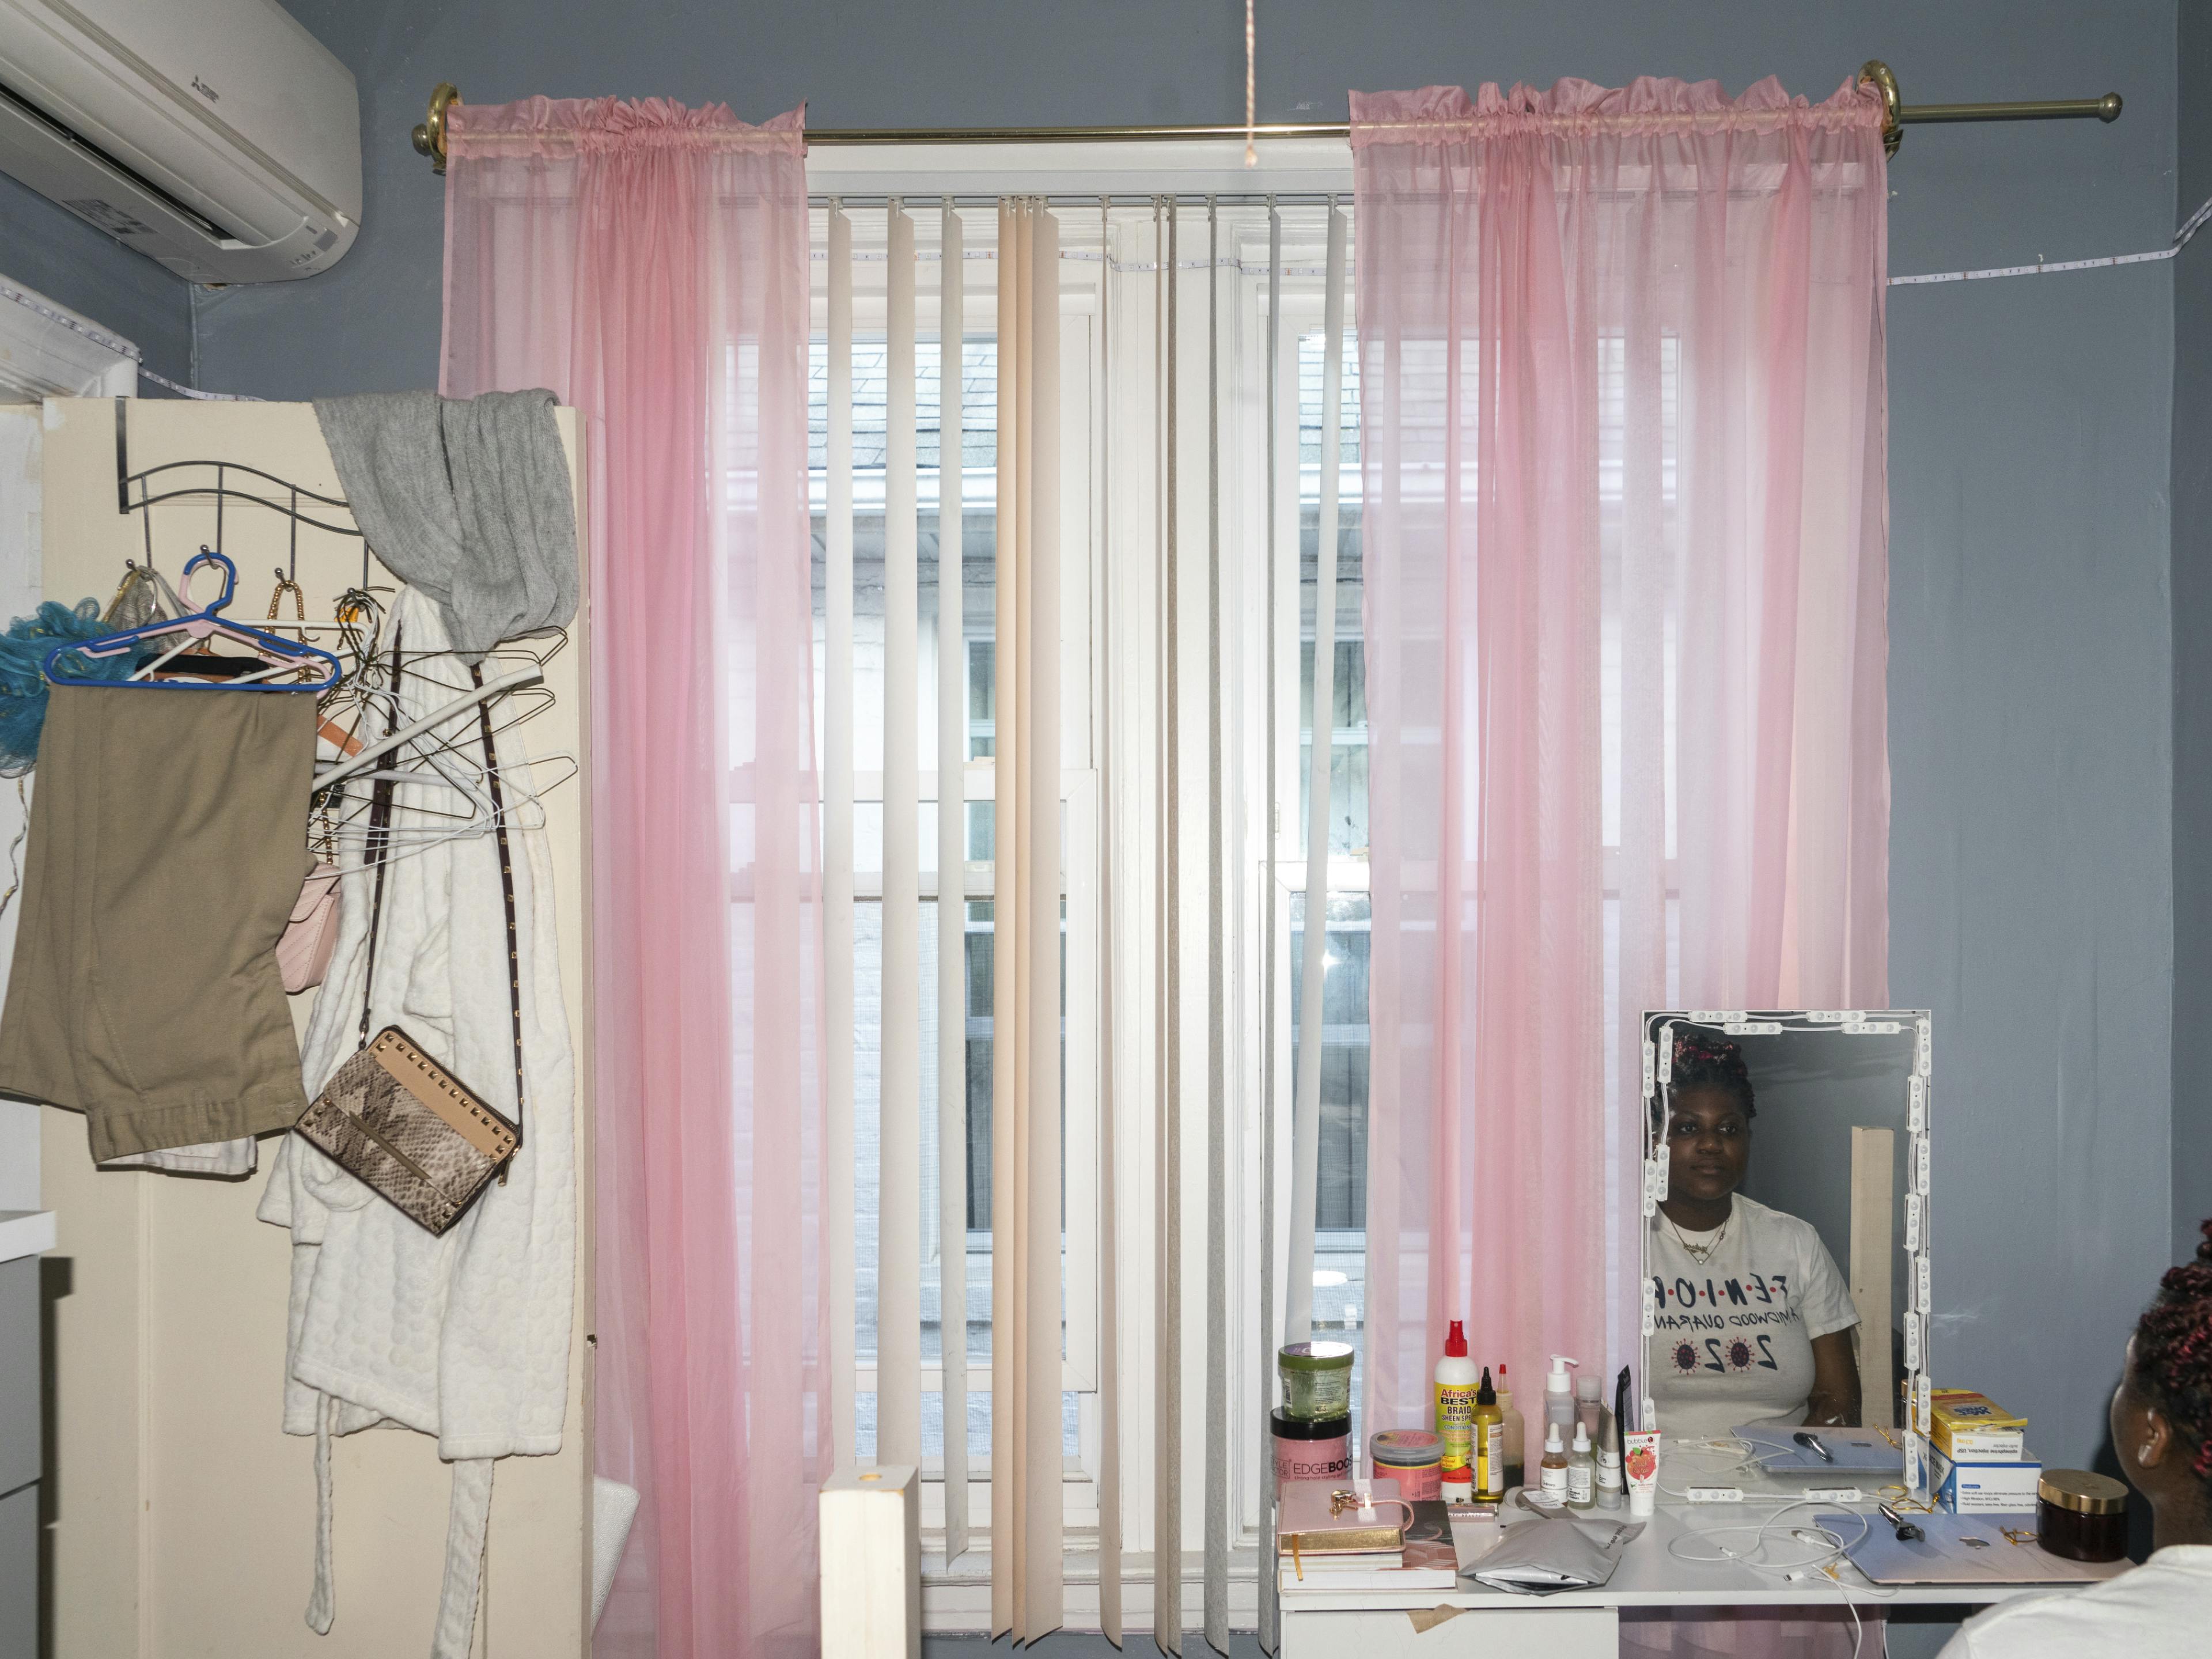 Julissa in her room in New York City, USA. Photography by Peter Van Agtmael.